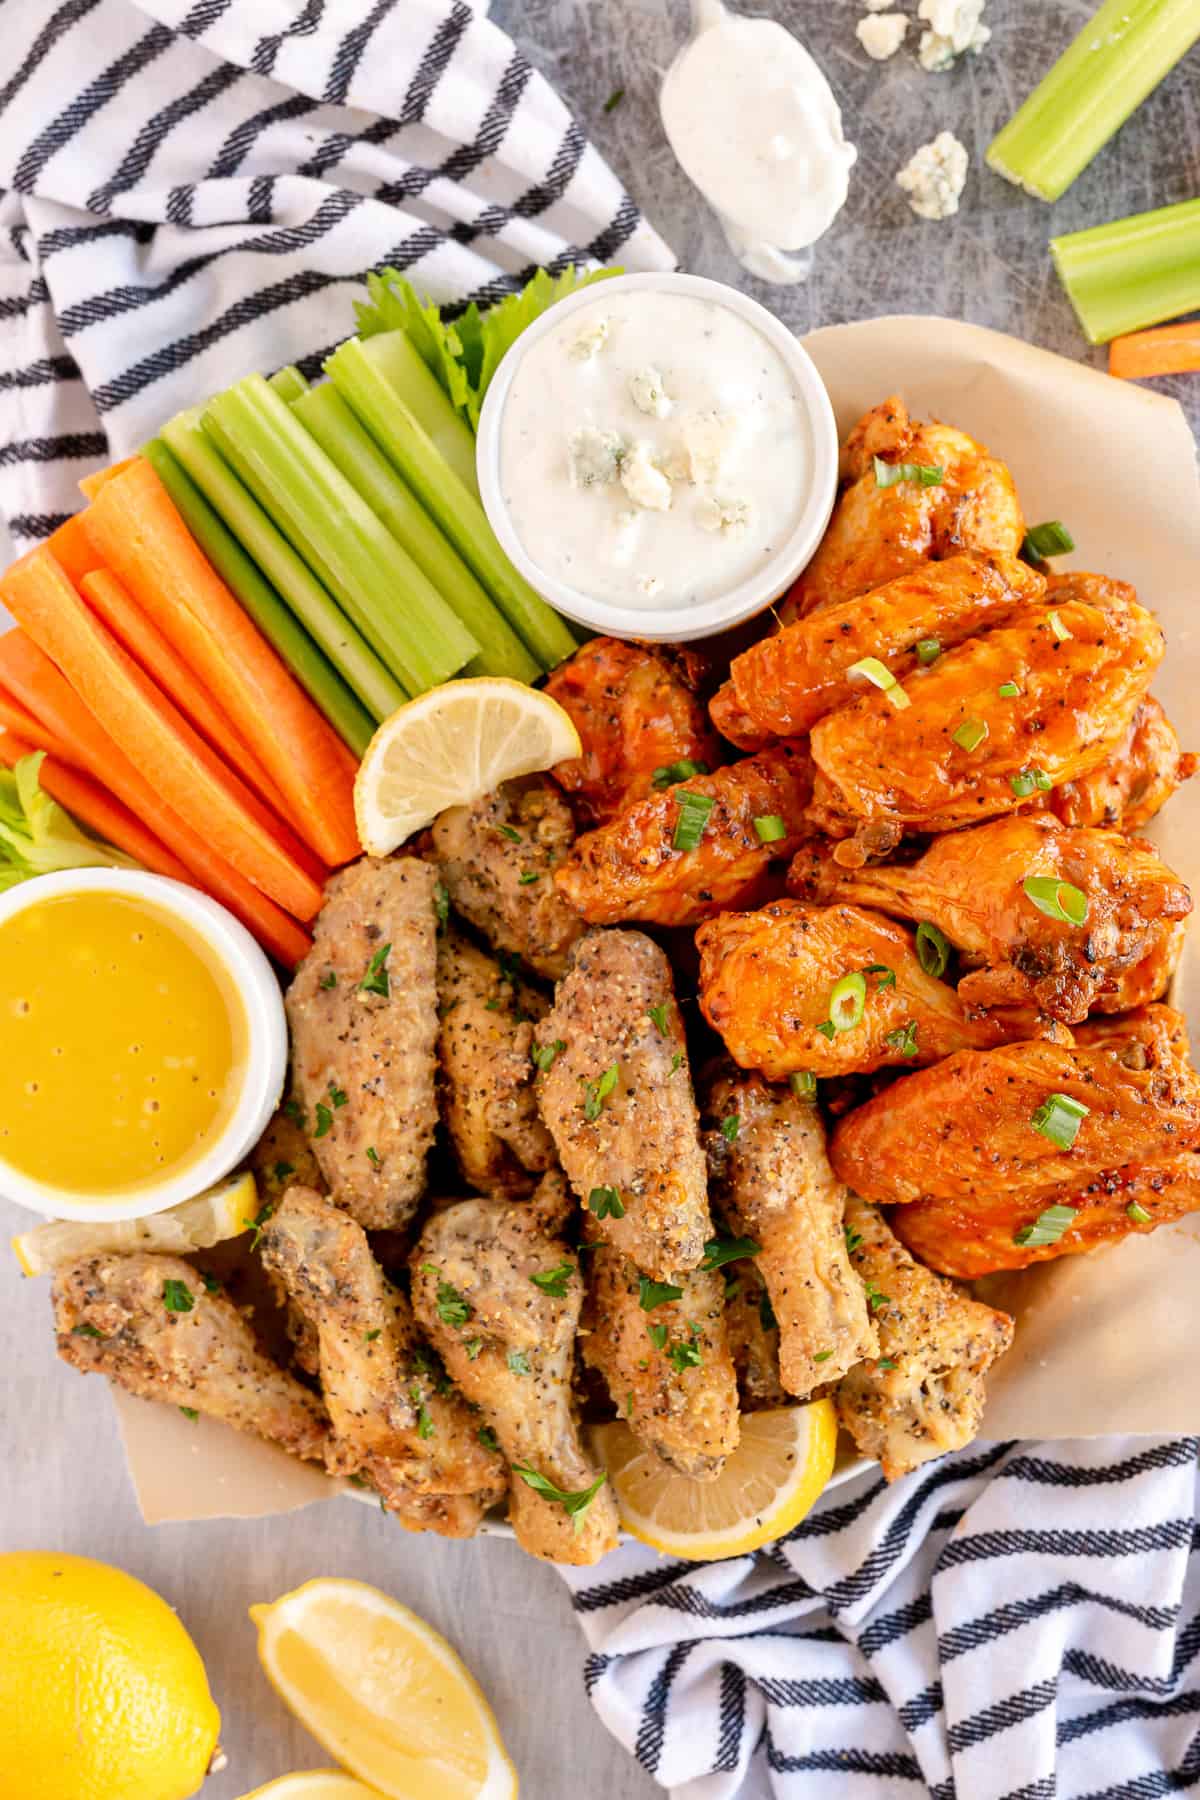 A platter of buffalo and lemon pepper wings with celery and carrot sticks.